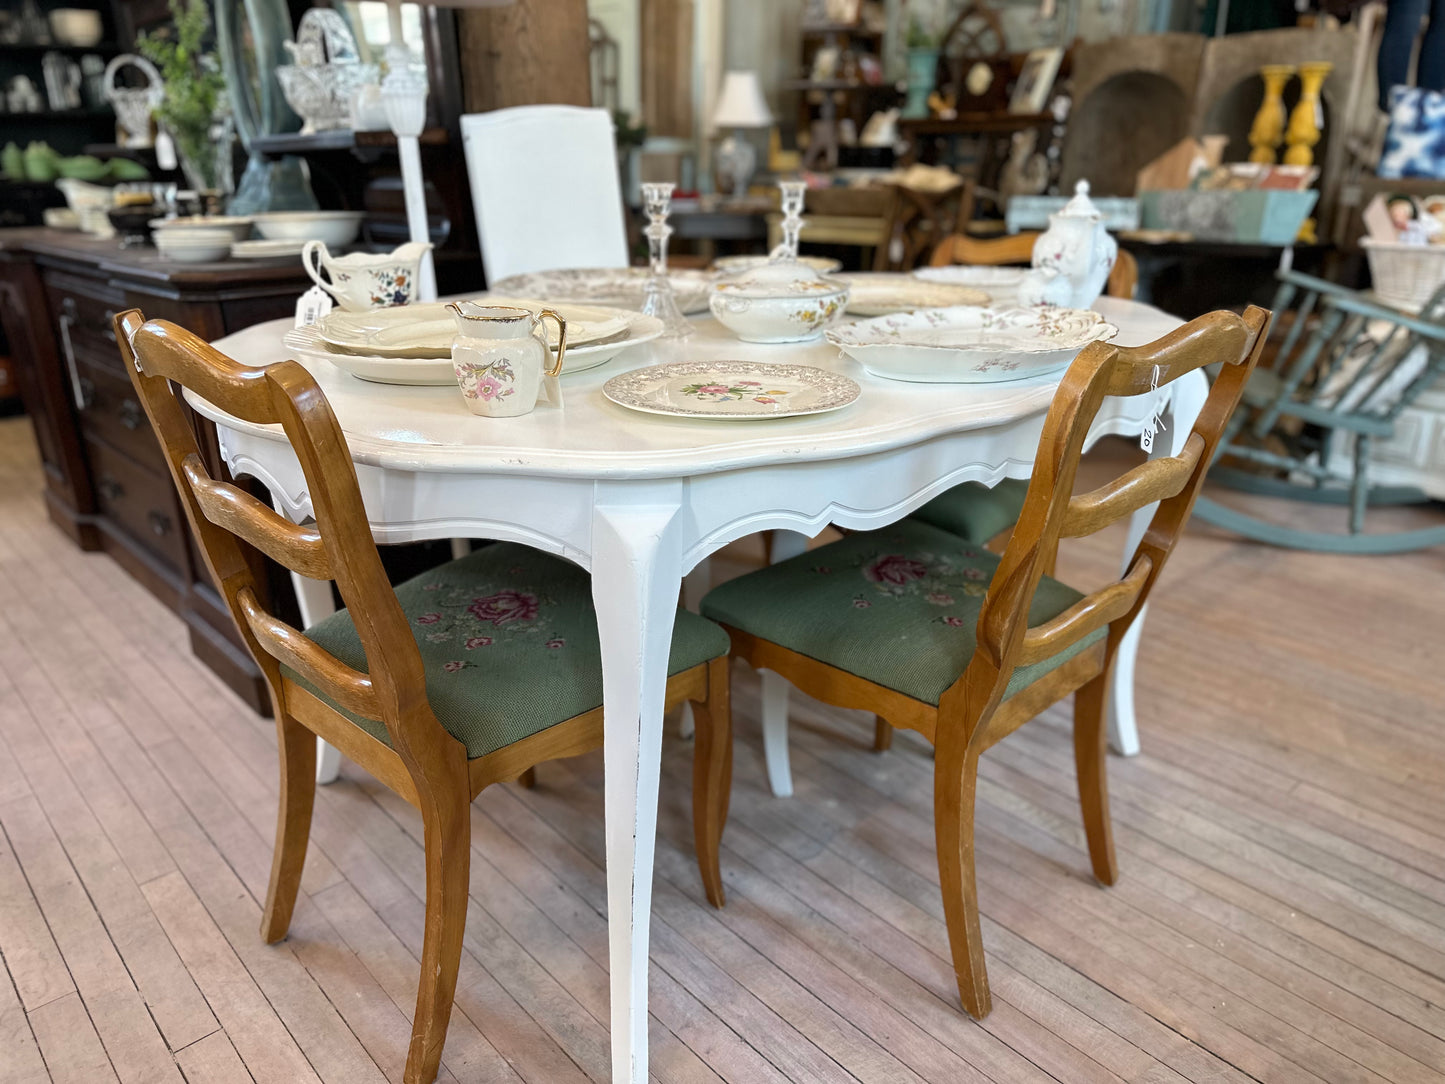 White French Provincial Table with one leaf